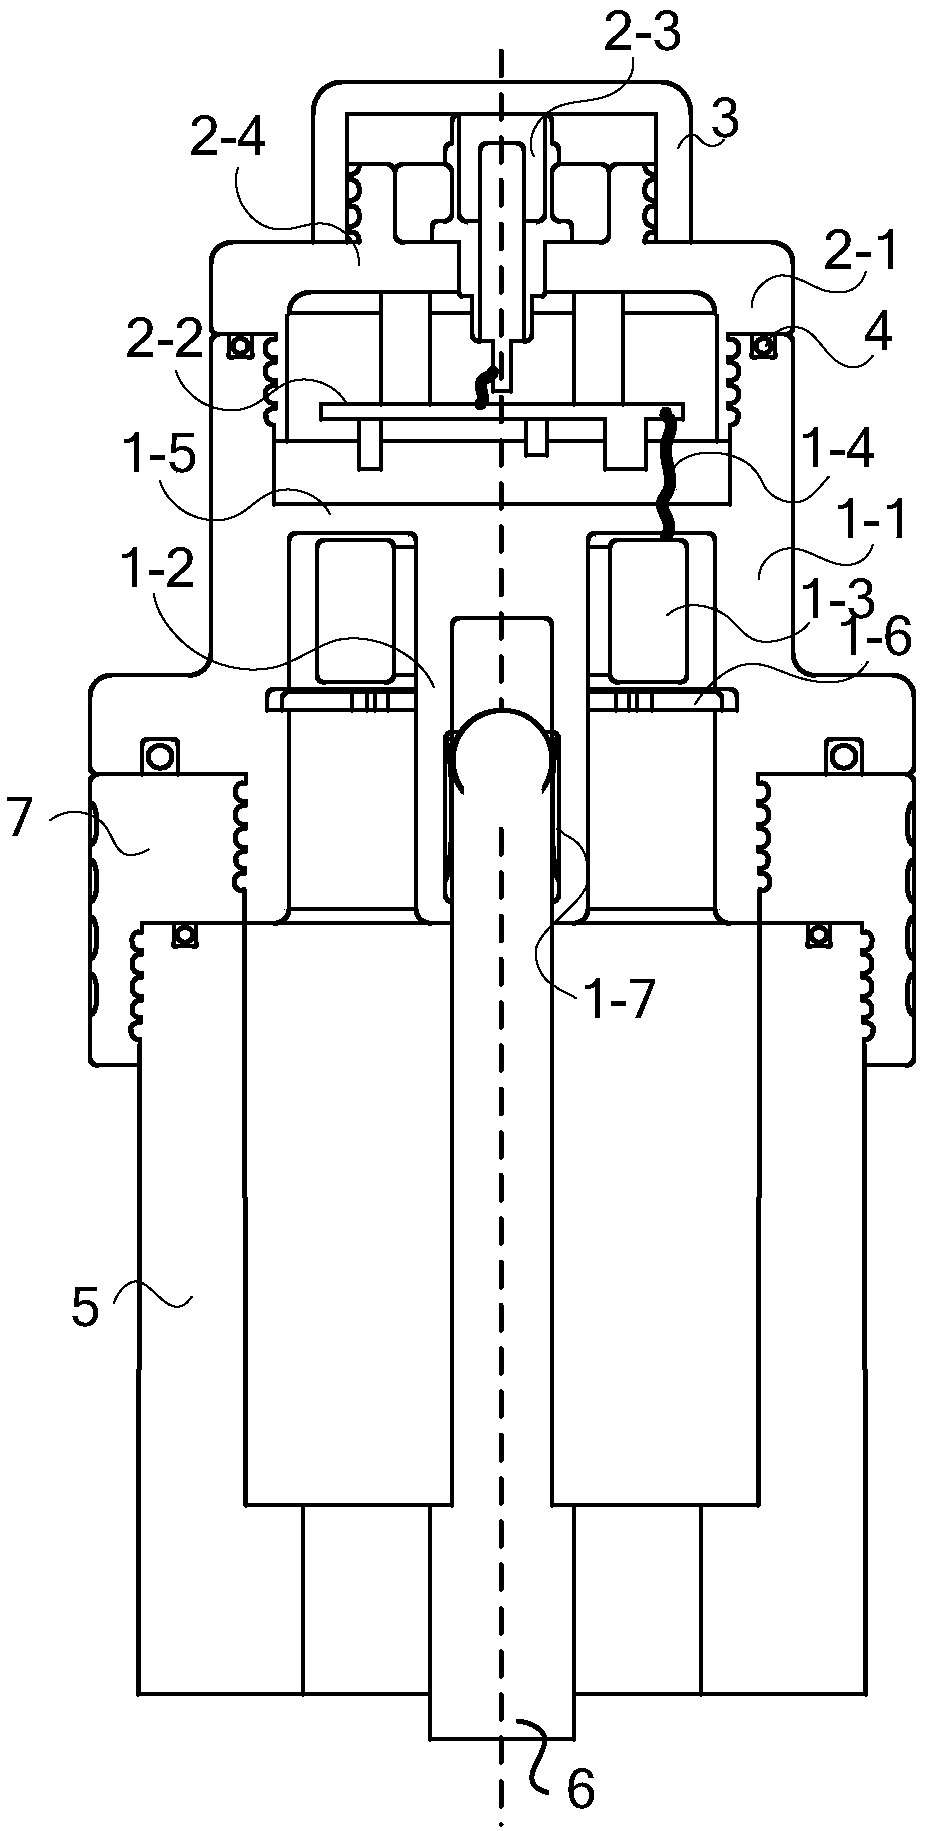 Capacitive bushing high-frequency partial discharge signal detection device